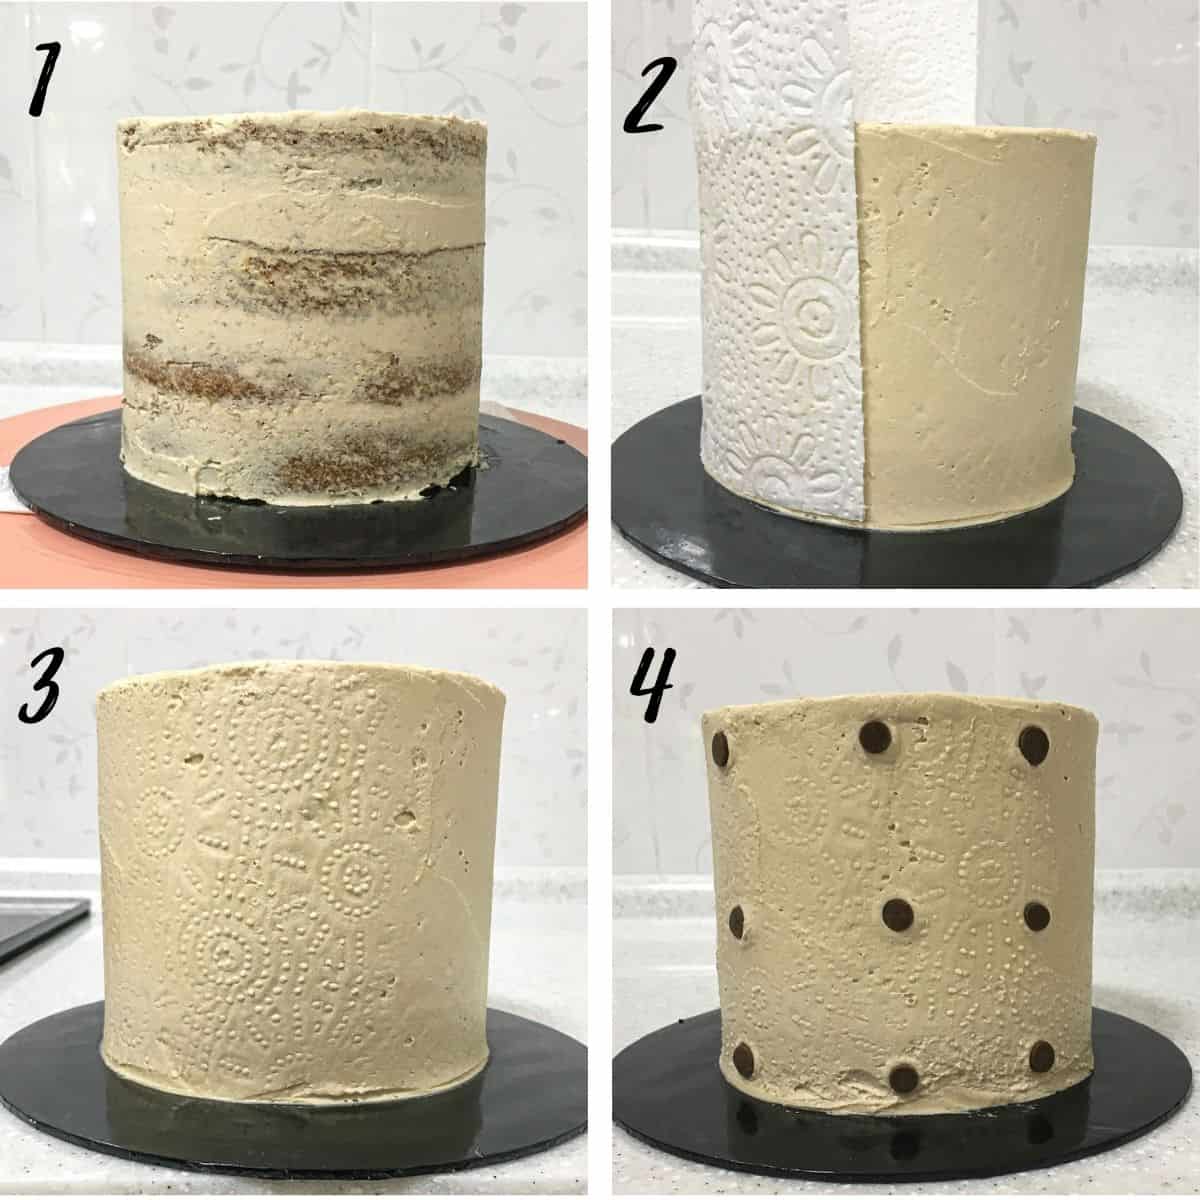 A poster of 4 images showing how to decorate a coffee flavored cake.